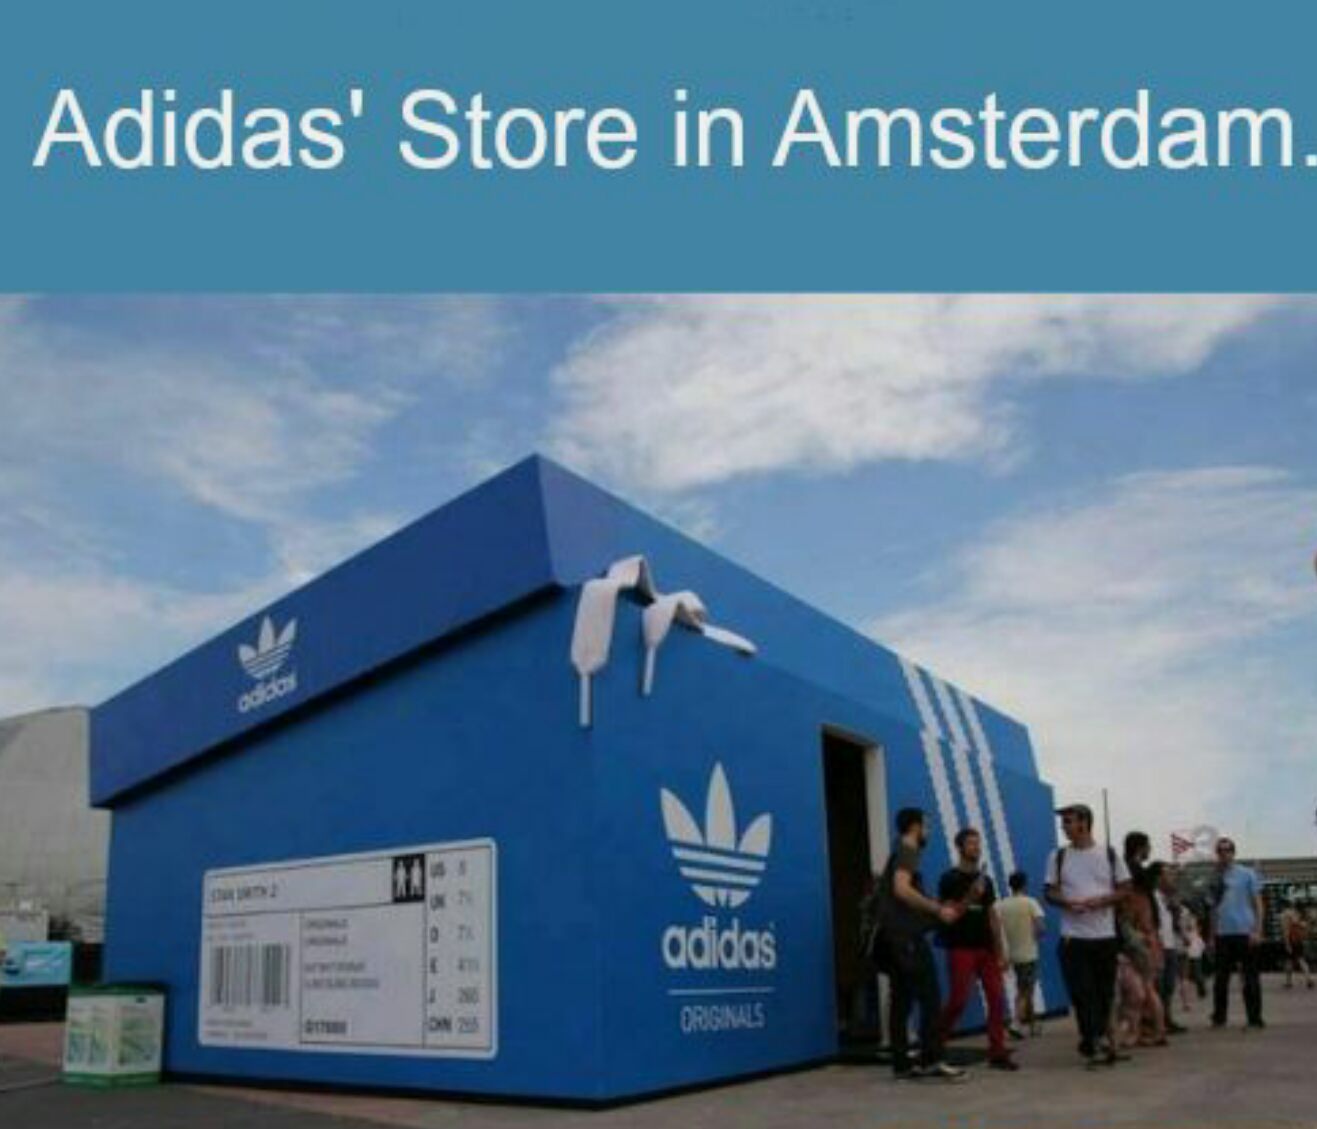 adidas pop up store - Adidas' Store in Amsterdam